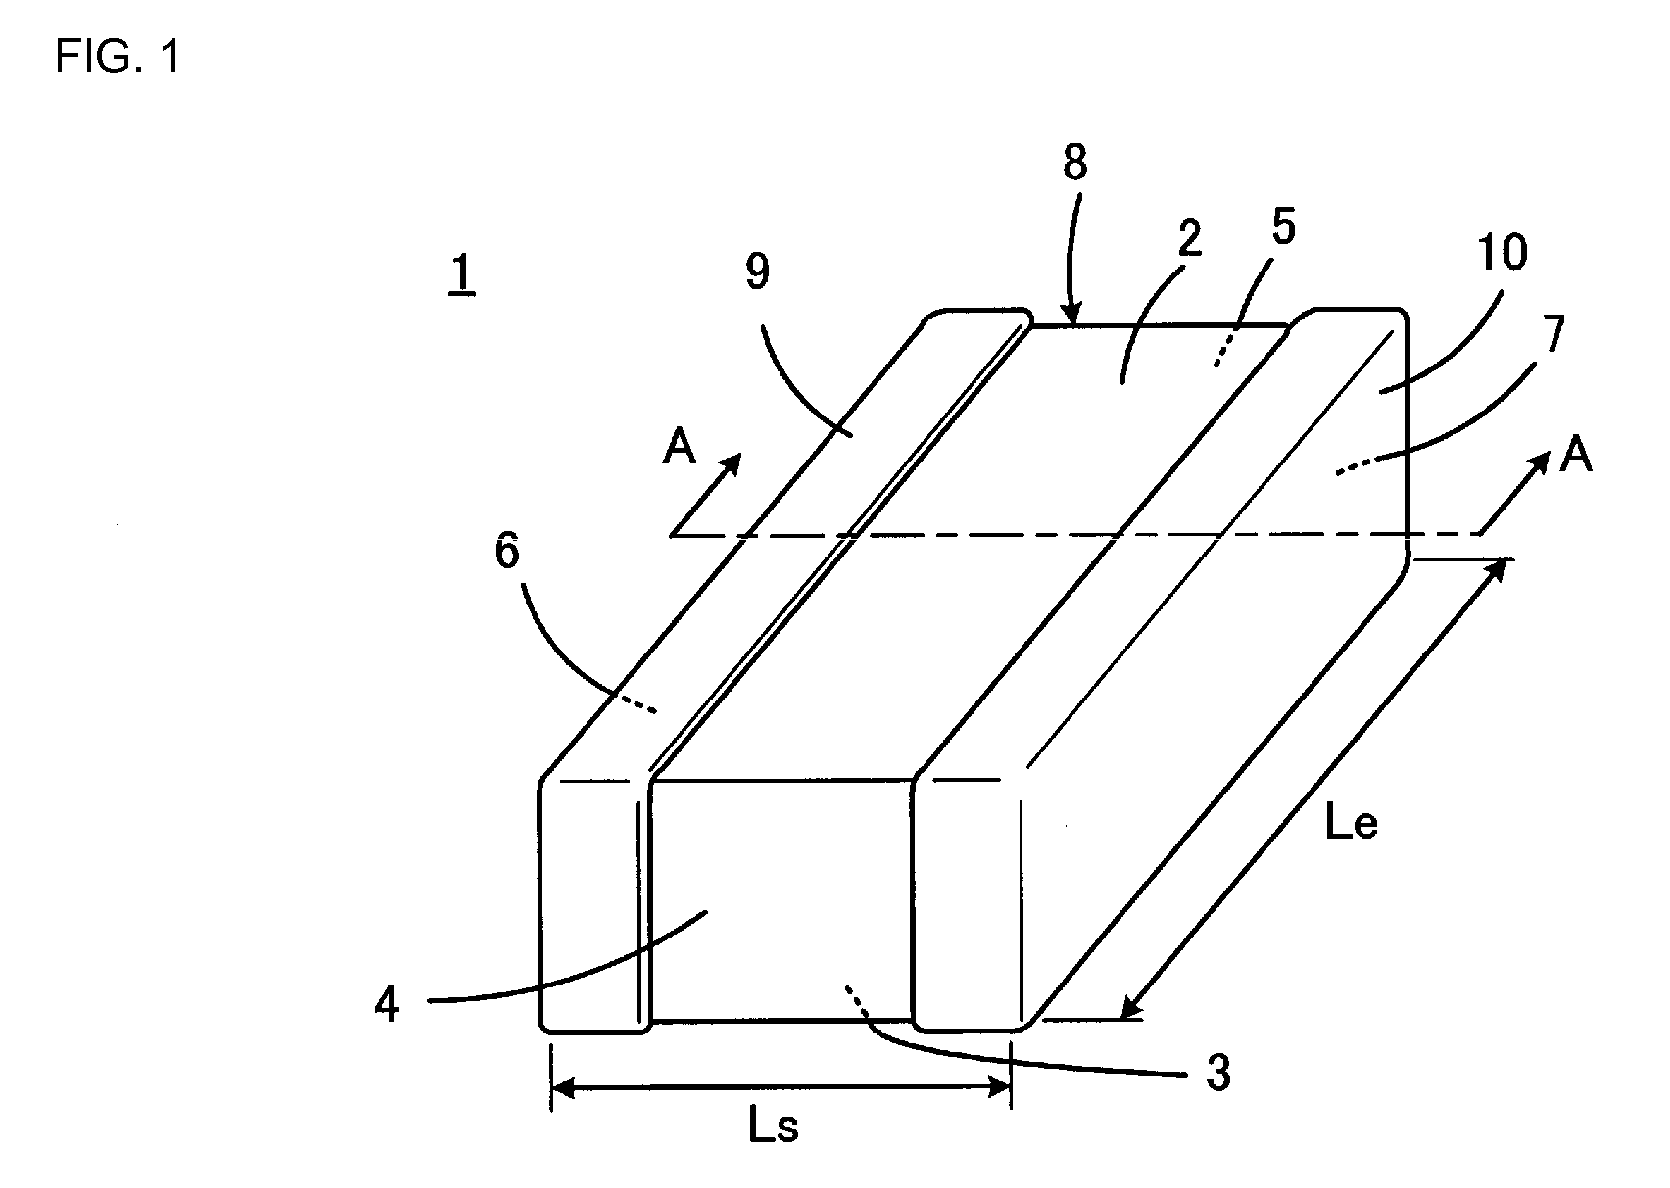 Multilayer capacitor having low equivalent series inductance and controlled equivalent series resistance